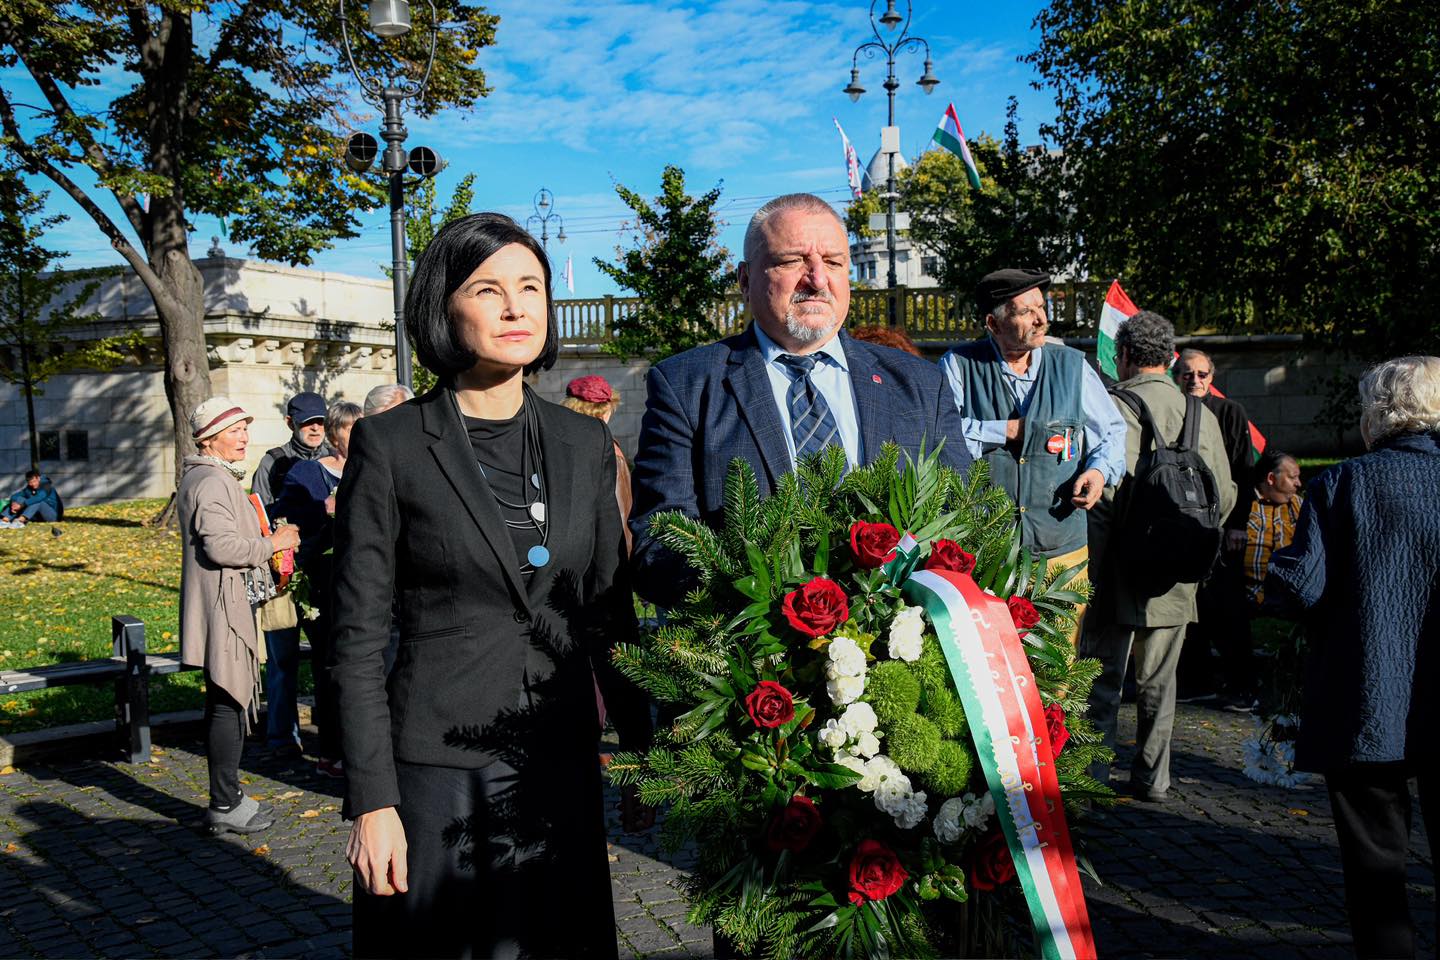 1956 Anniversary Marked by Opposition Parties in Hungary